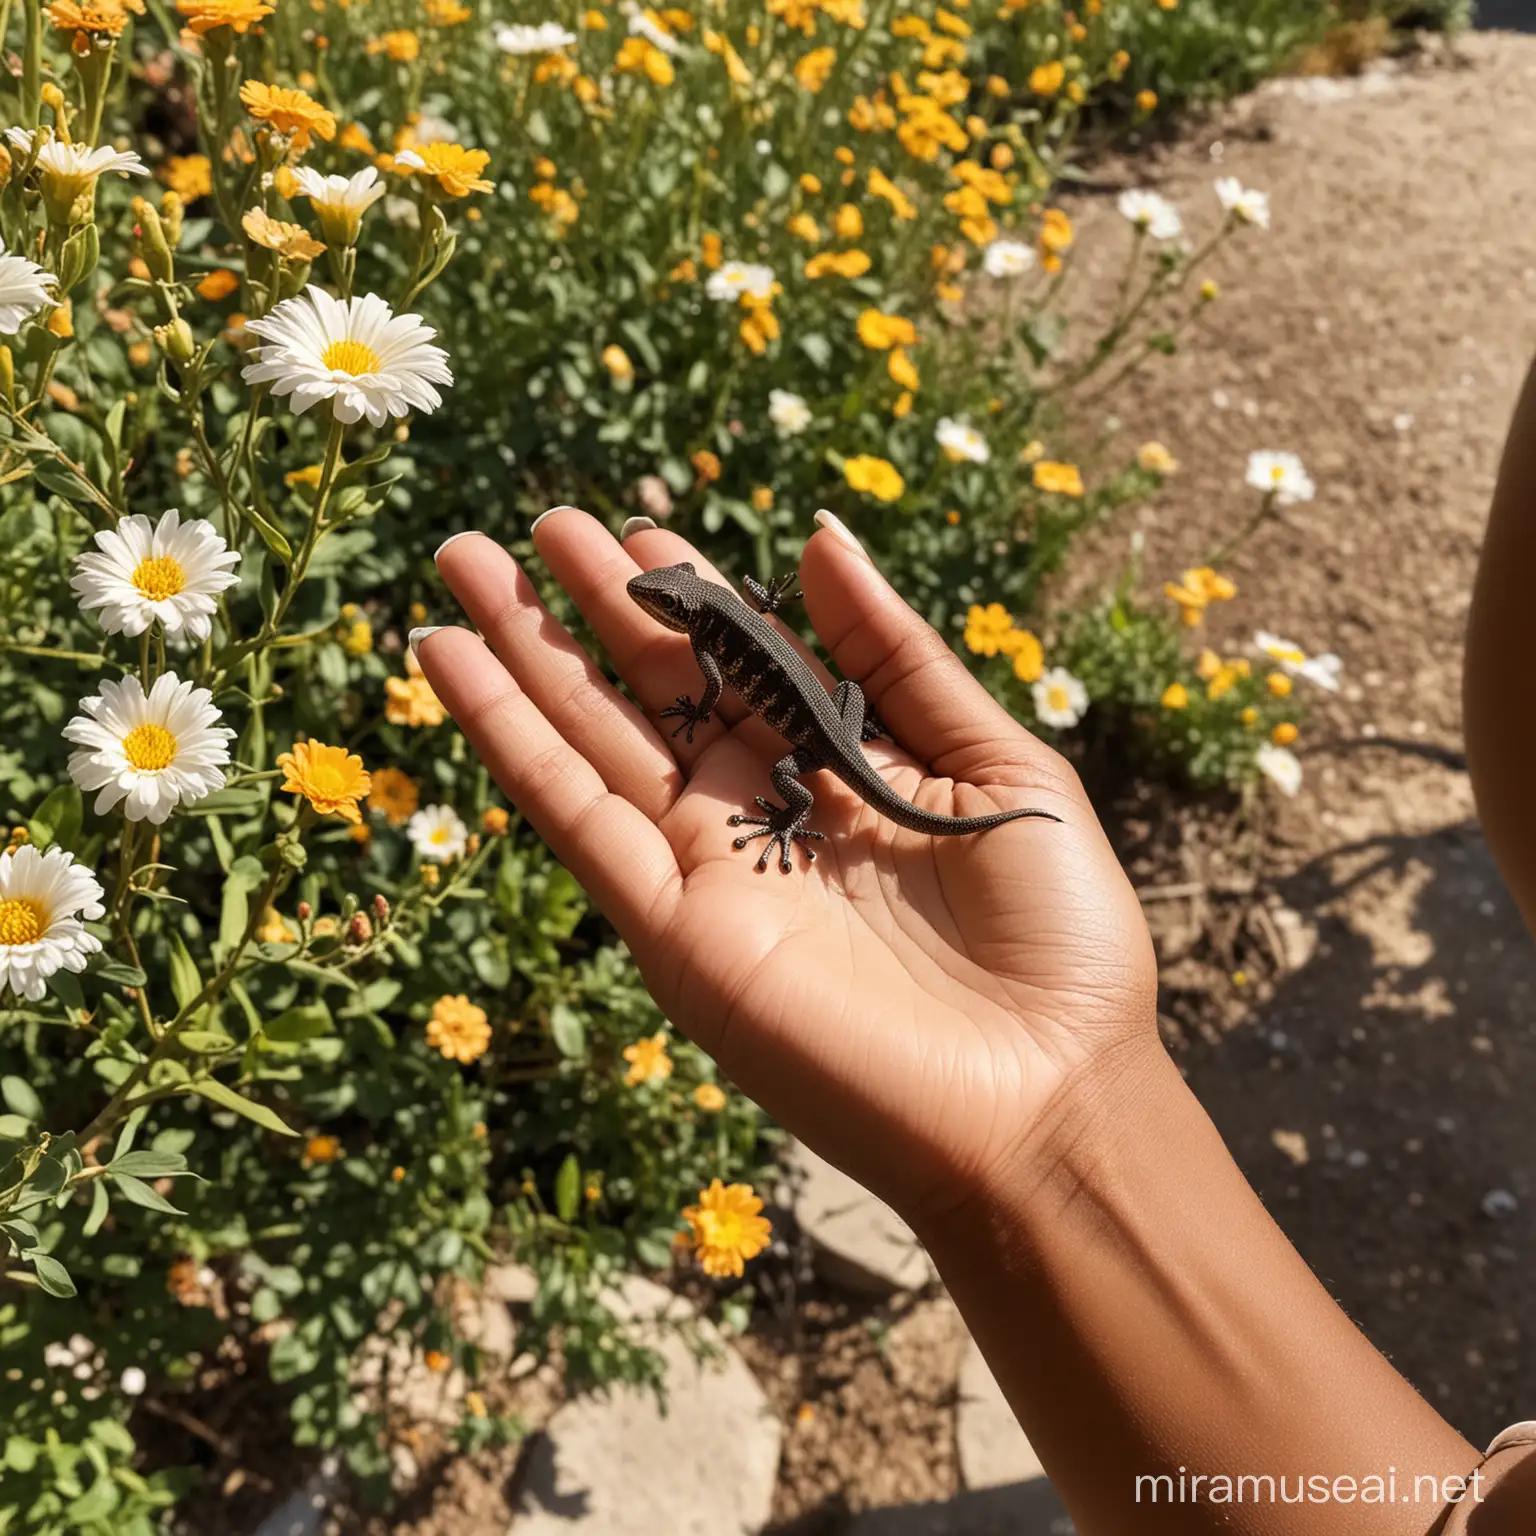 dark brown hands of a black girl with a gecko on in her hand. Flowers in the background nice sunny day.